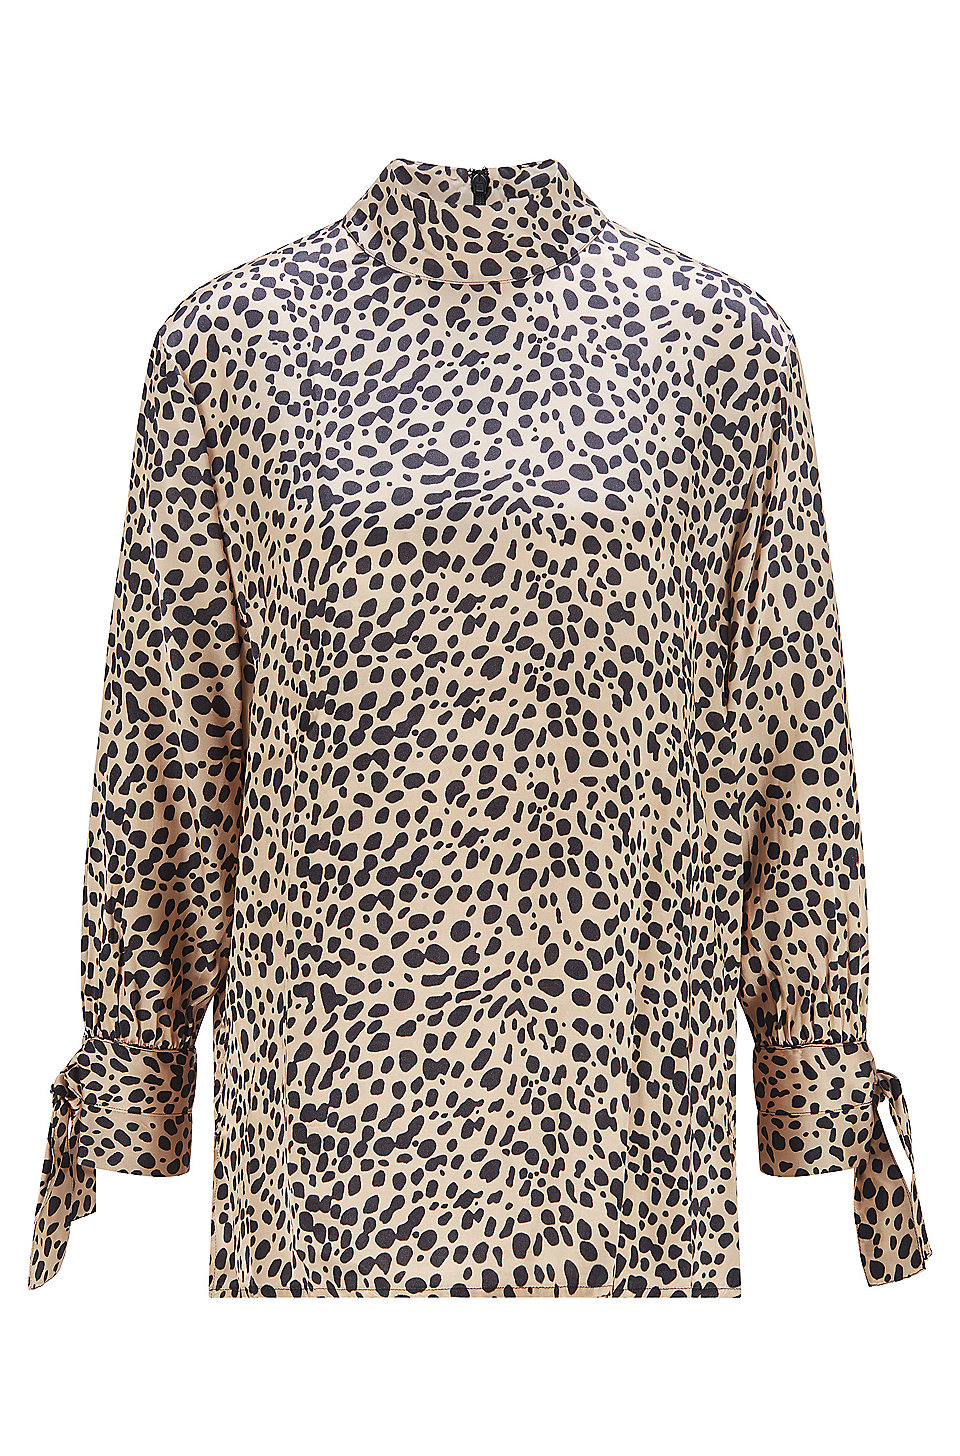 BOSS - Animal-print top with tie-up cuff details